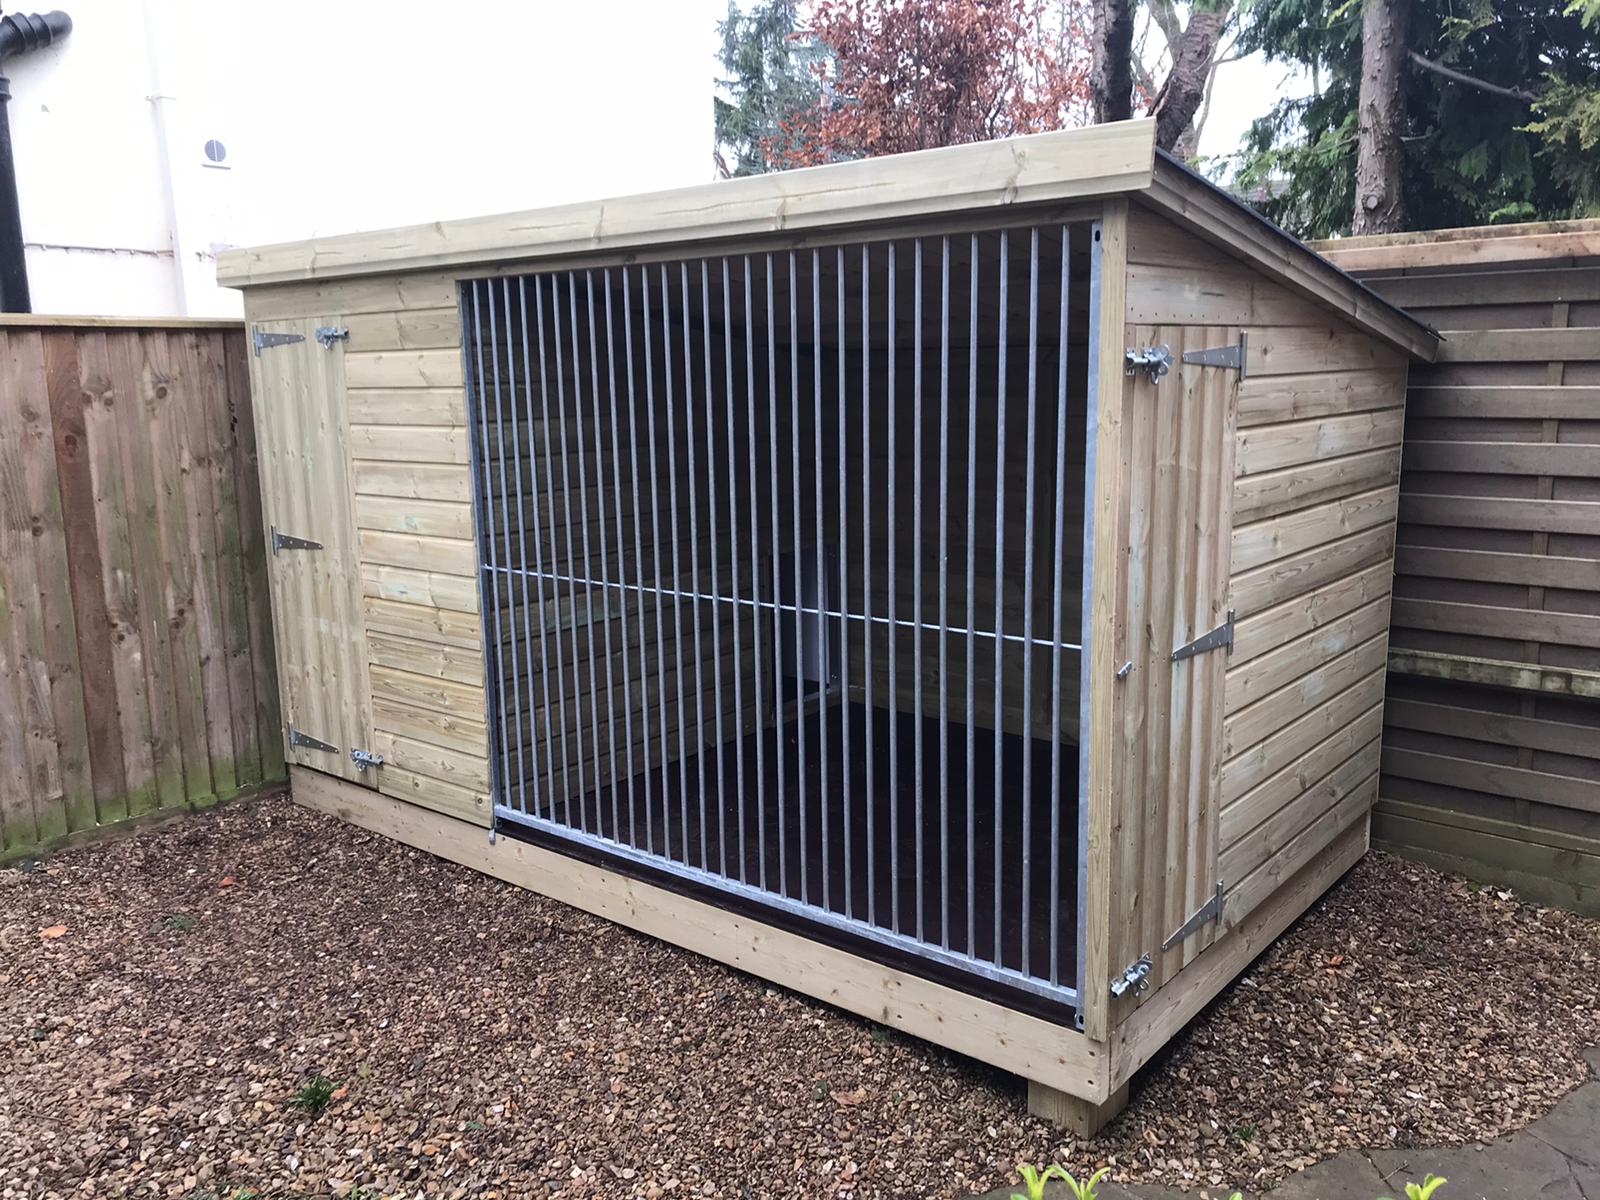 Ettiley Wooden Dog Kennel And Run 8ft (wide) x 6ft (depth) x 5'7ft (high)